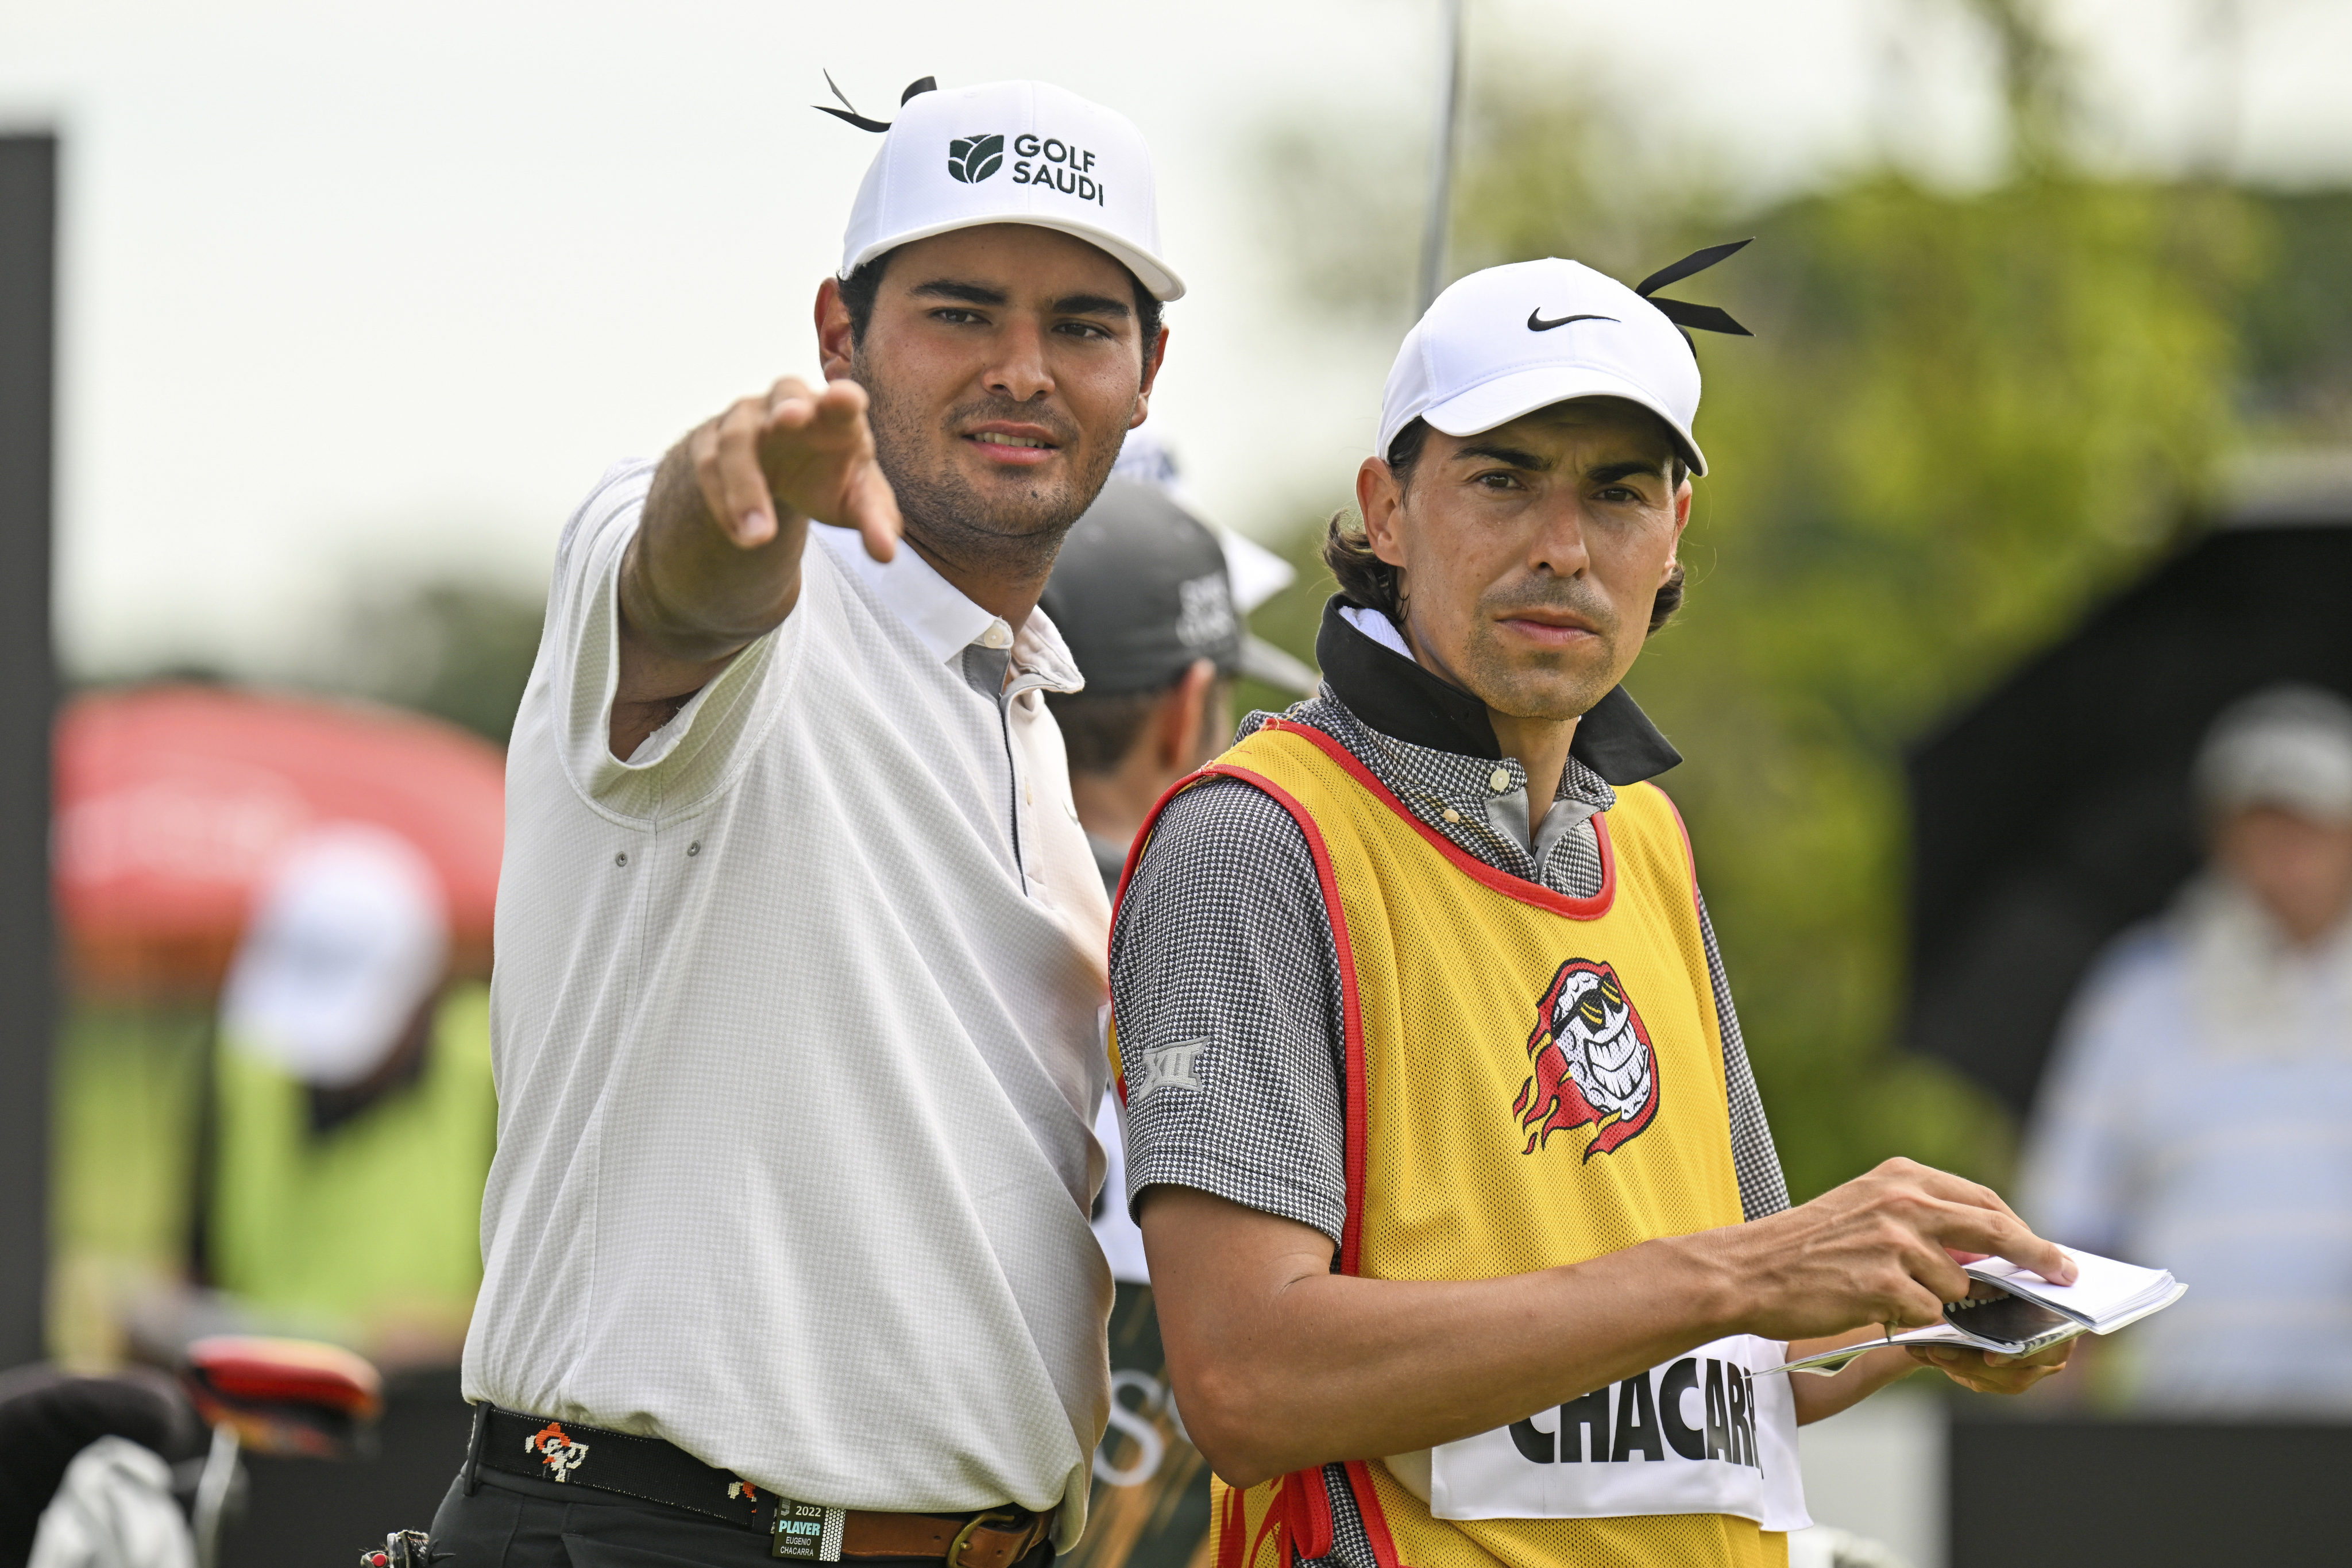 Eugenio Lopez-Chacarra from Spain gestures with his caddy on the 11th hole during the LIV Golf Invitational Bangkok at Stonehill Golf Club in Pathum Thani, Thailand.Photo: AP